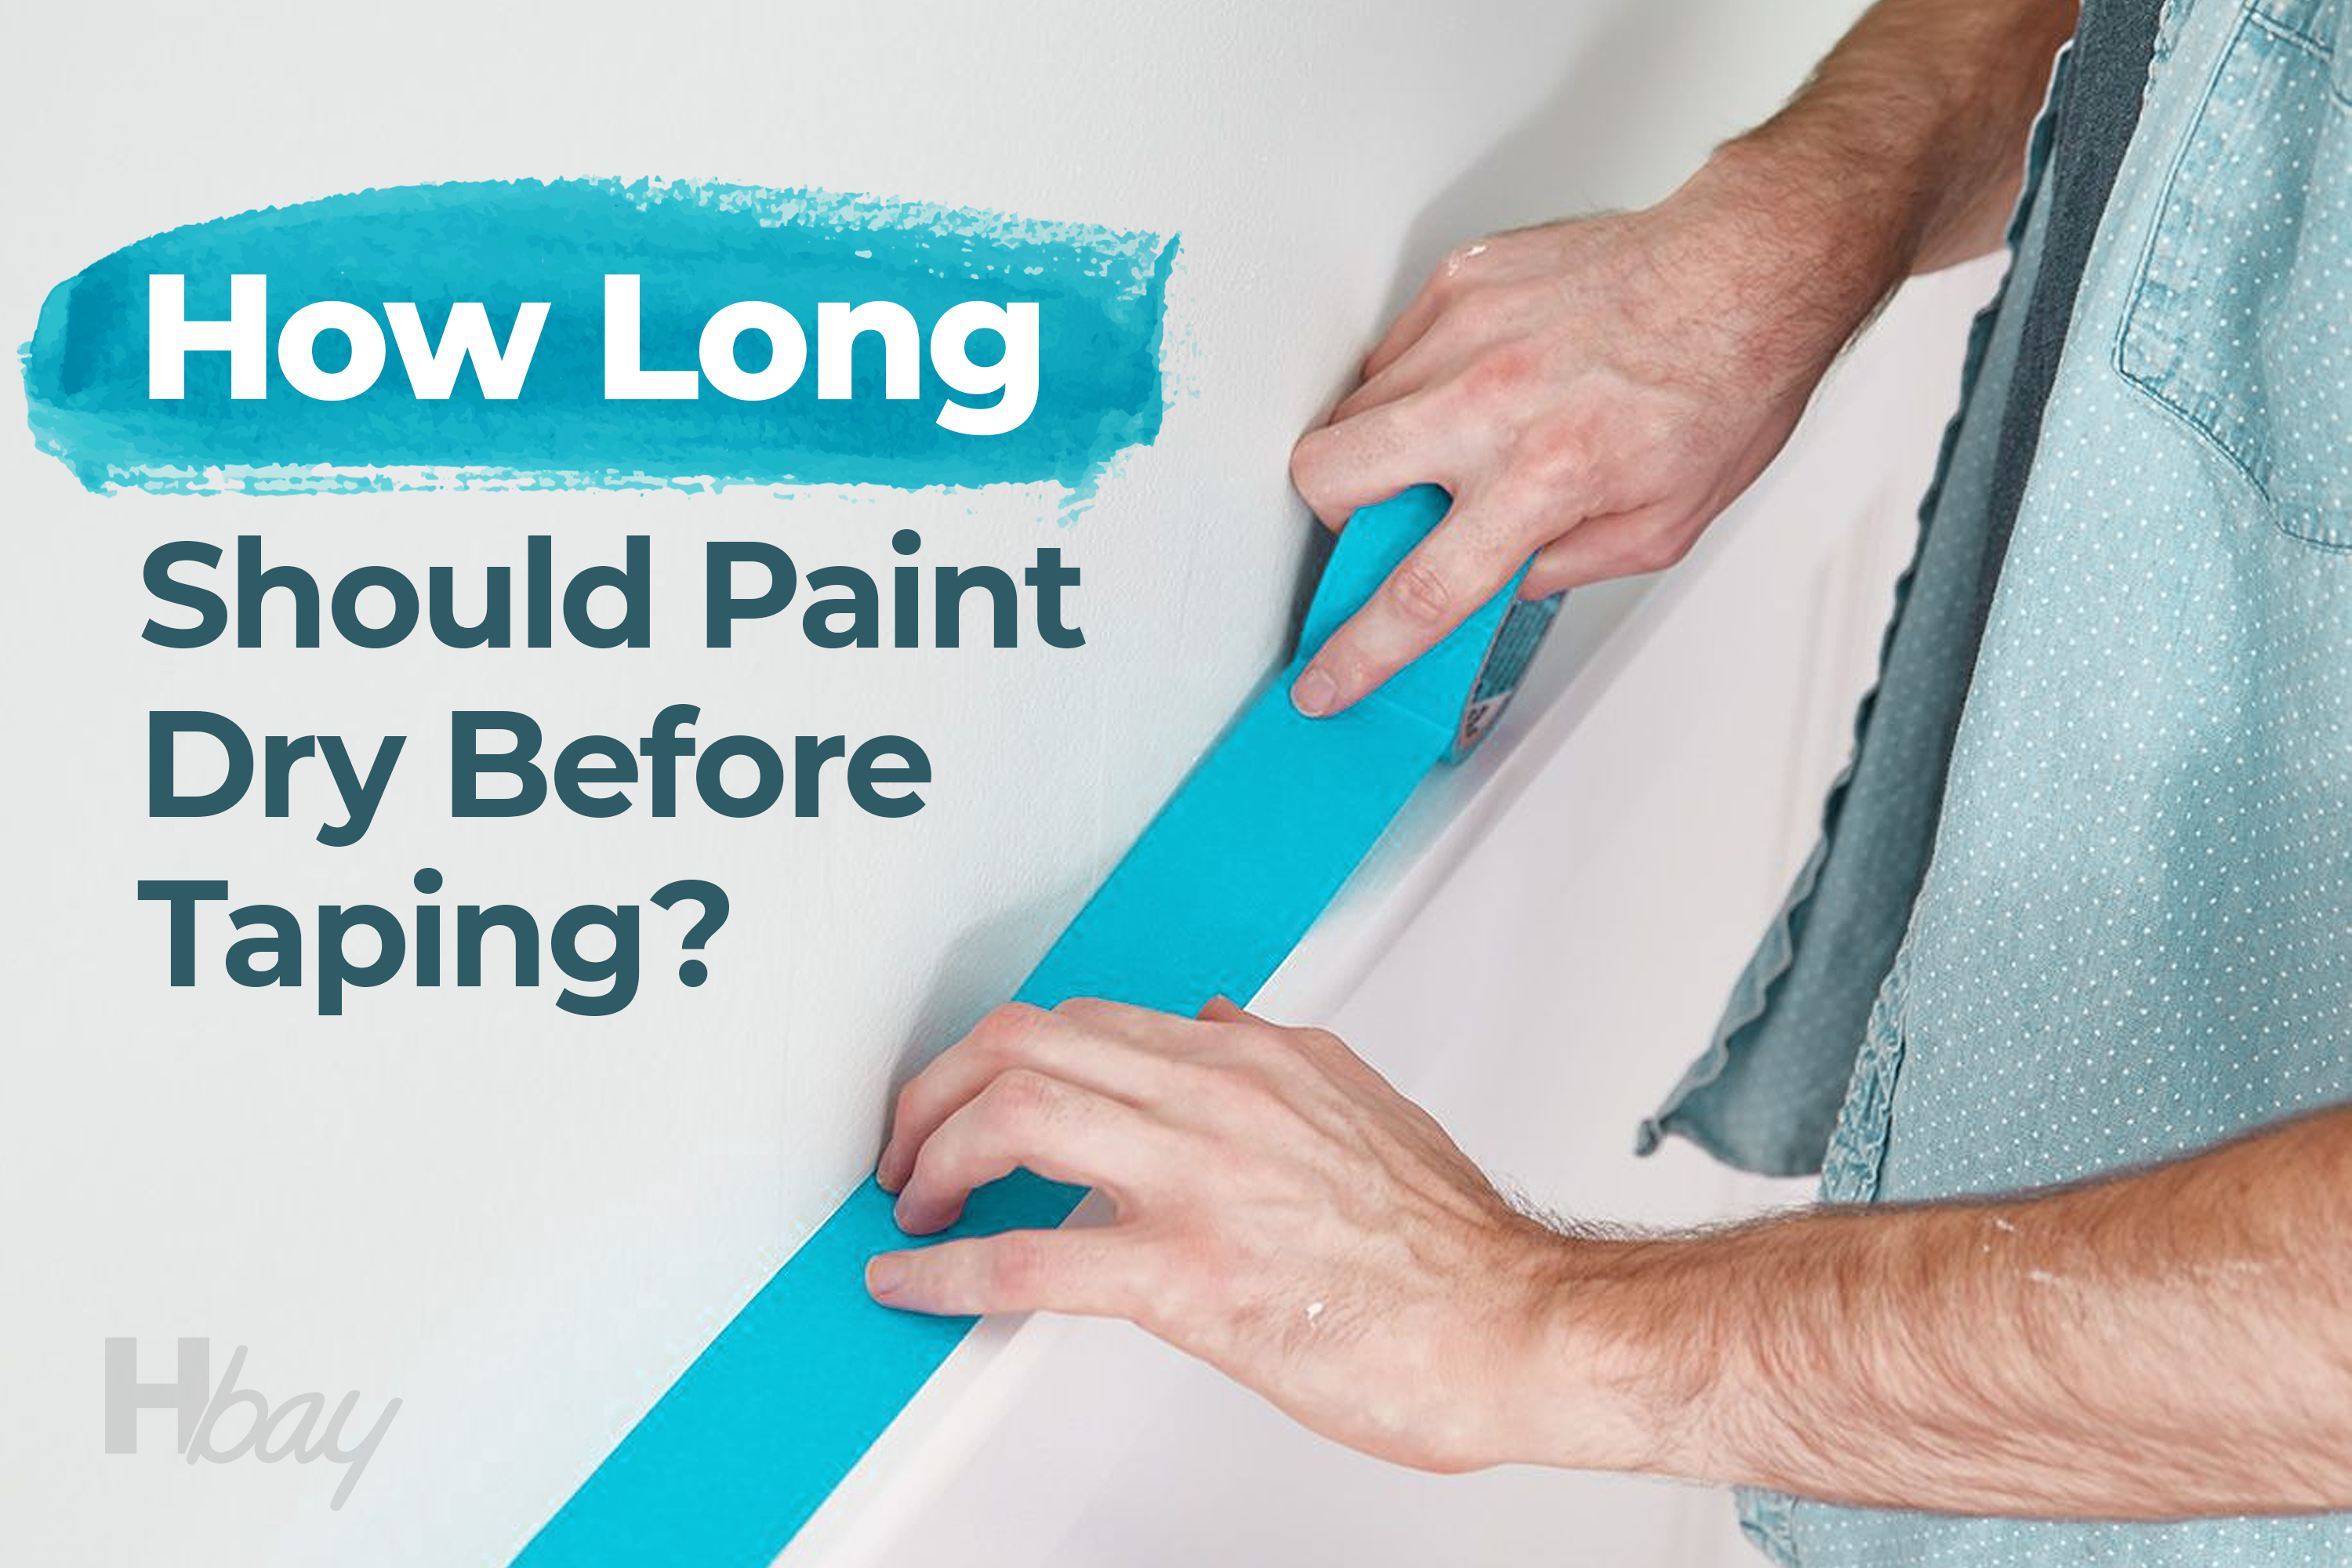 How Long Should Paint Dry Before Taping